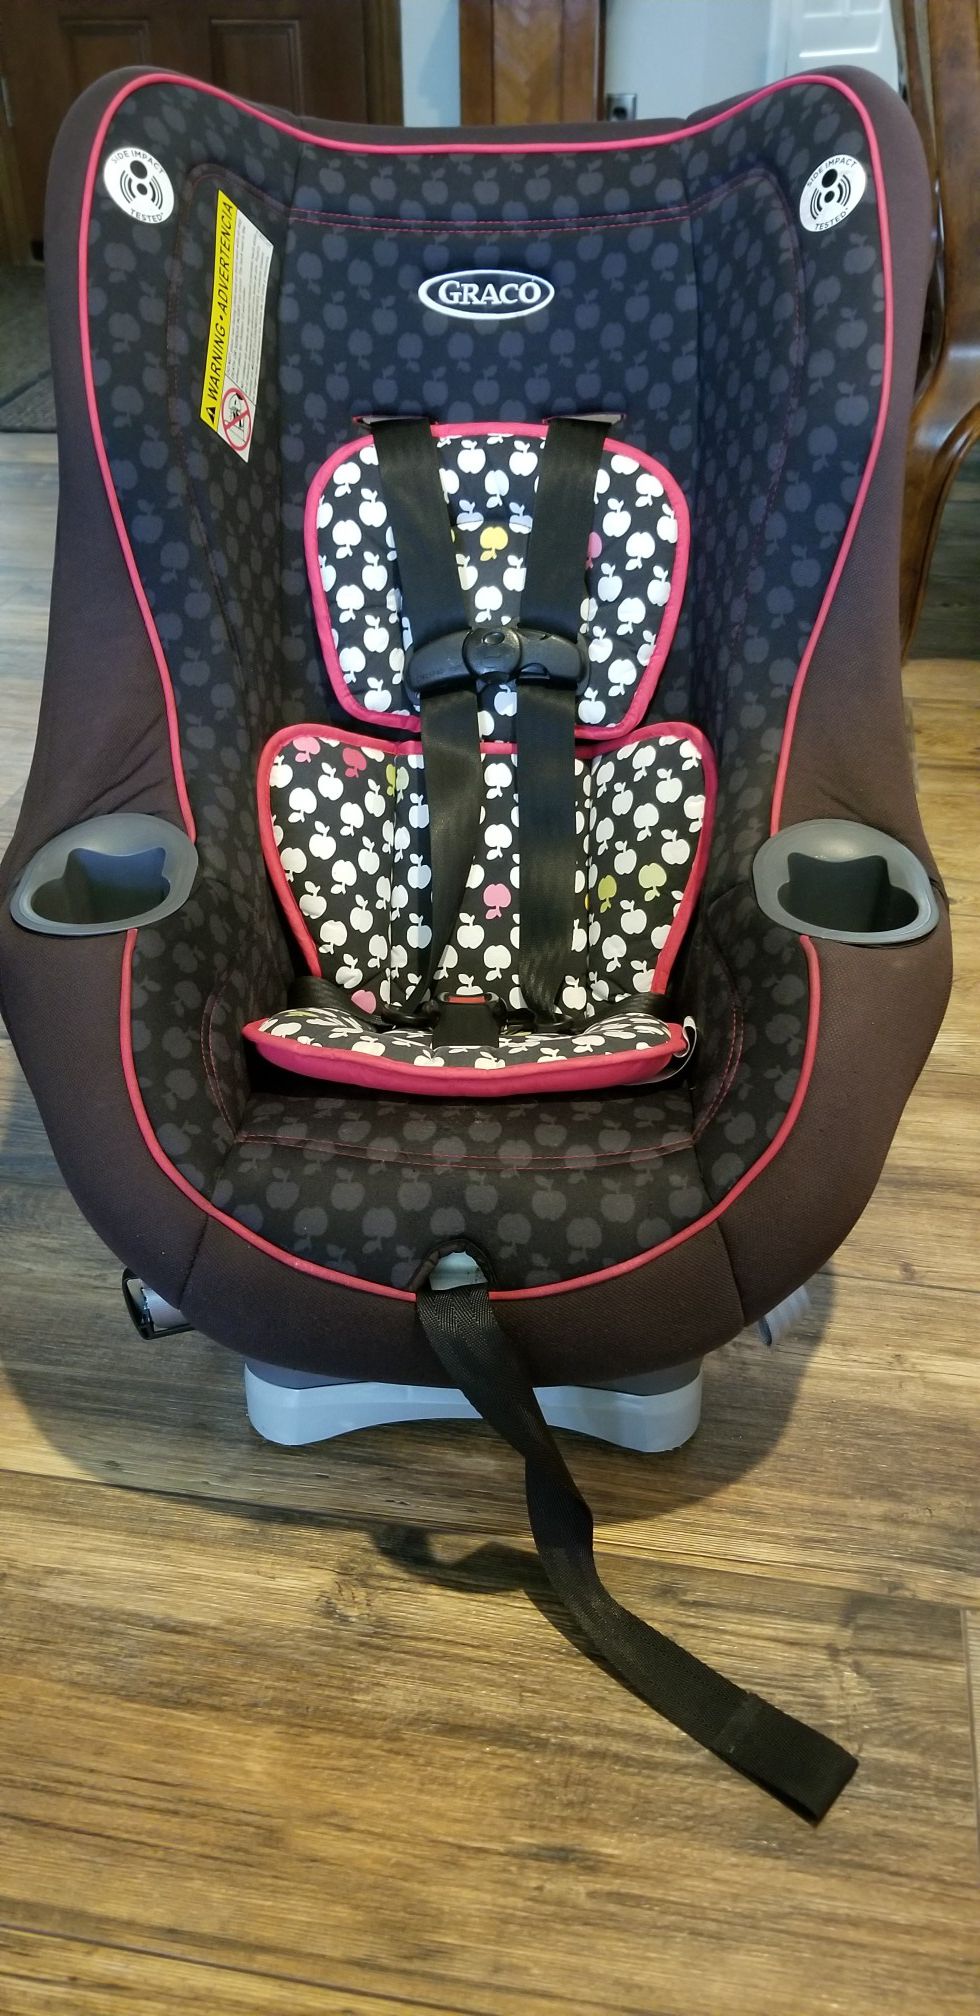 Graco carseat (My Ride 65)